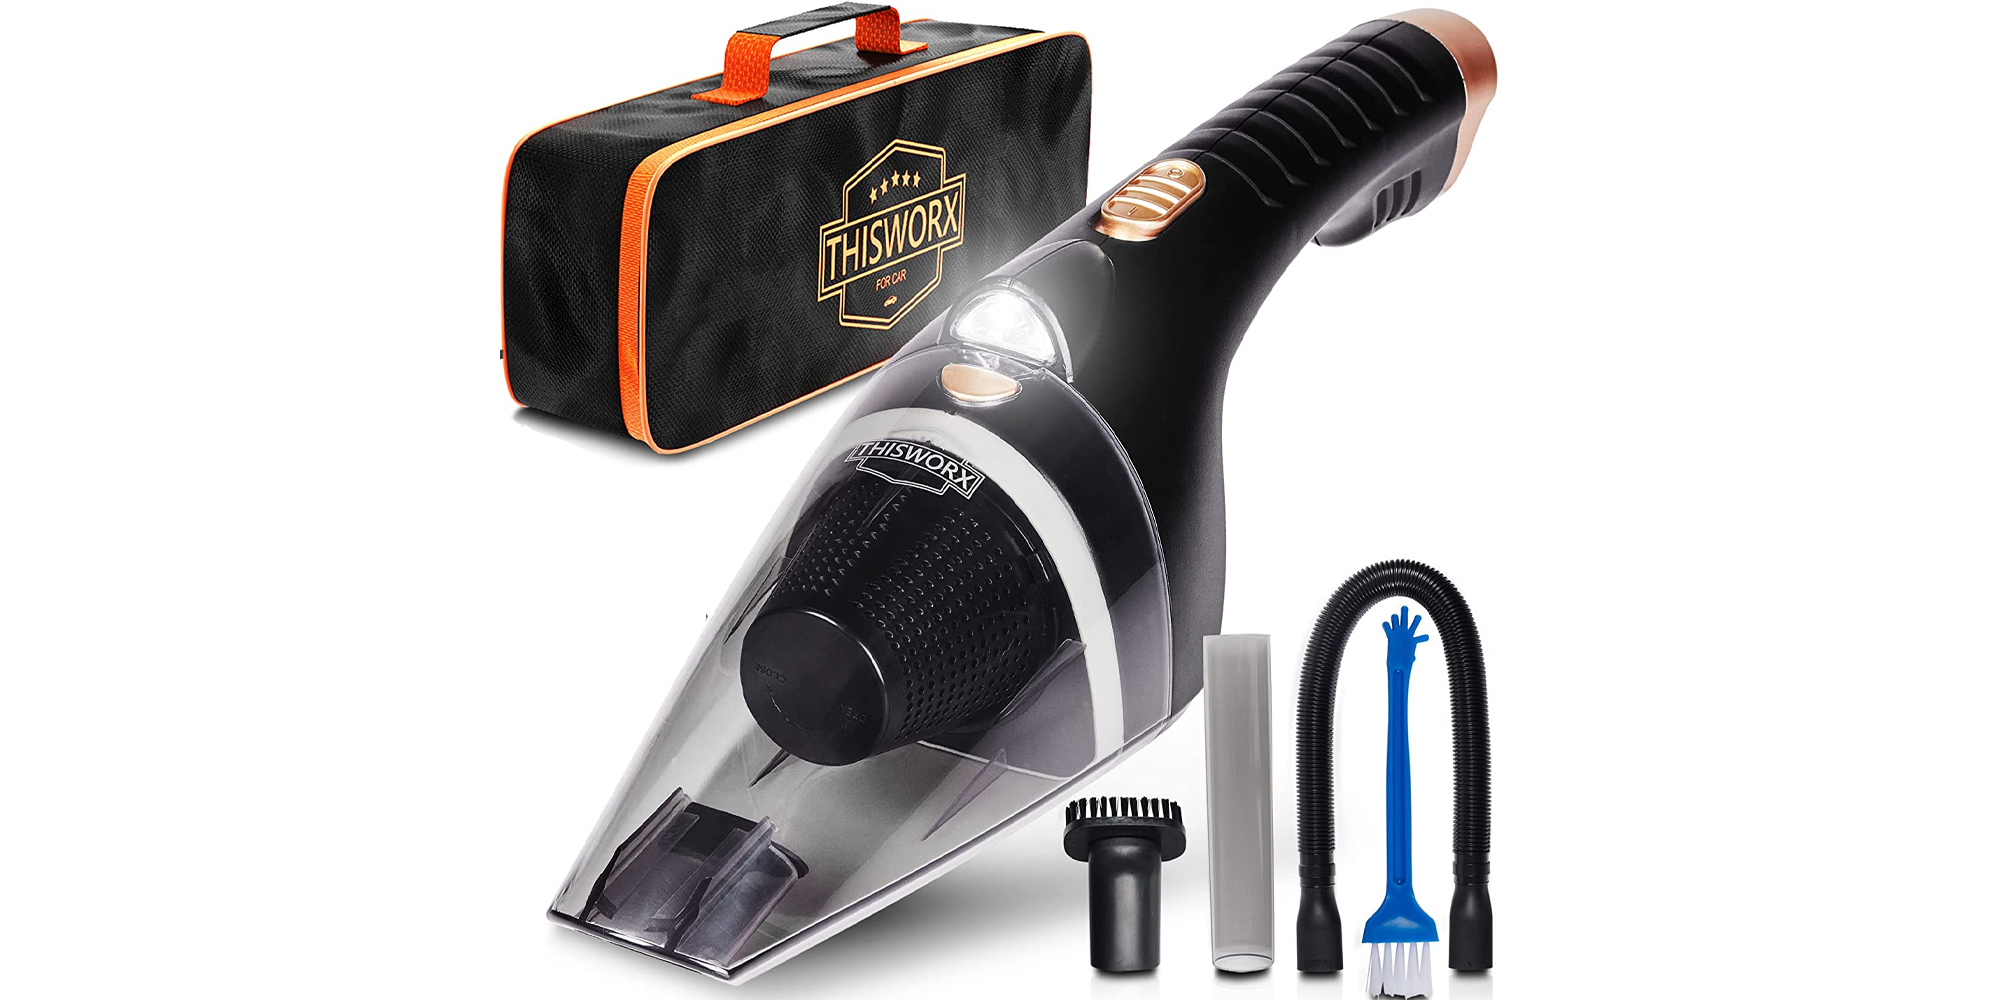 Prepare for spring cleaning with the ThisWorx Car Vacuum for $22, a new low